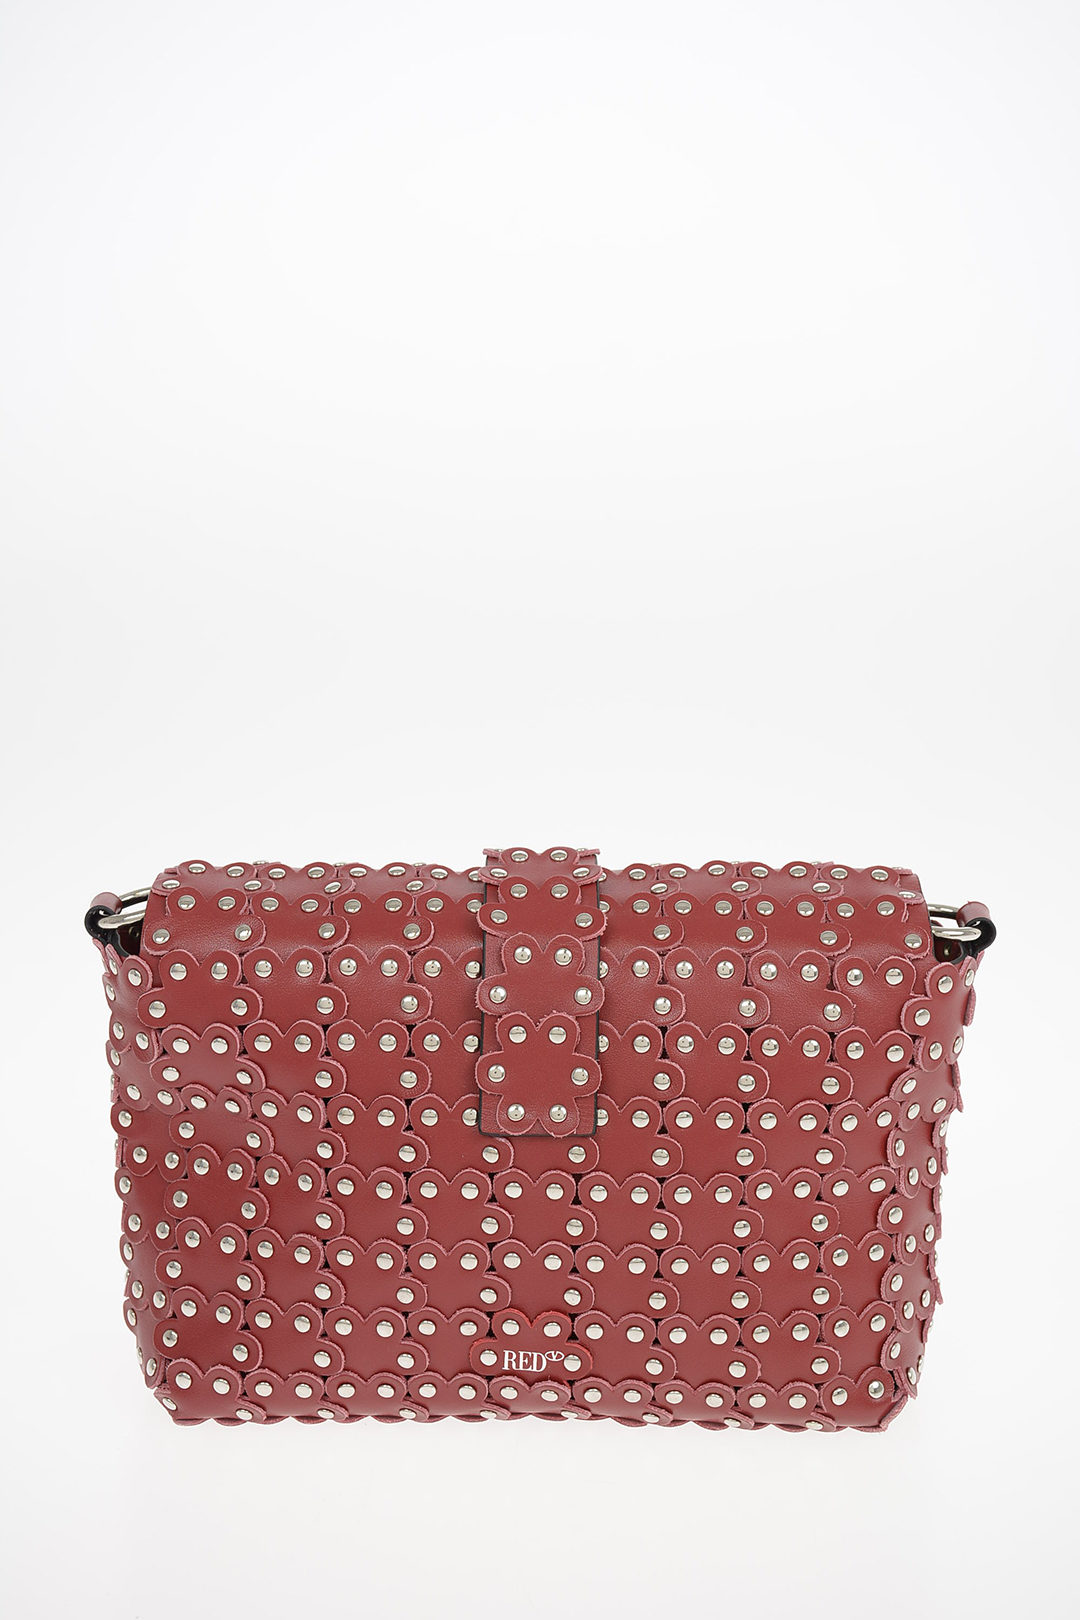 Red Valentino studded puffy bag  Bags, Valentino studs, Red valentino